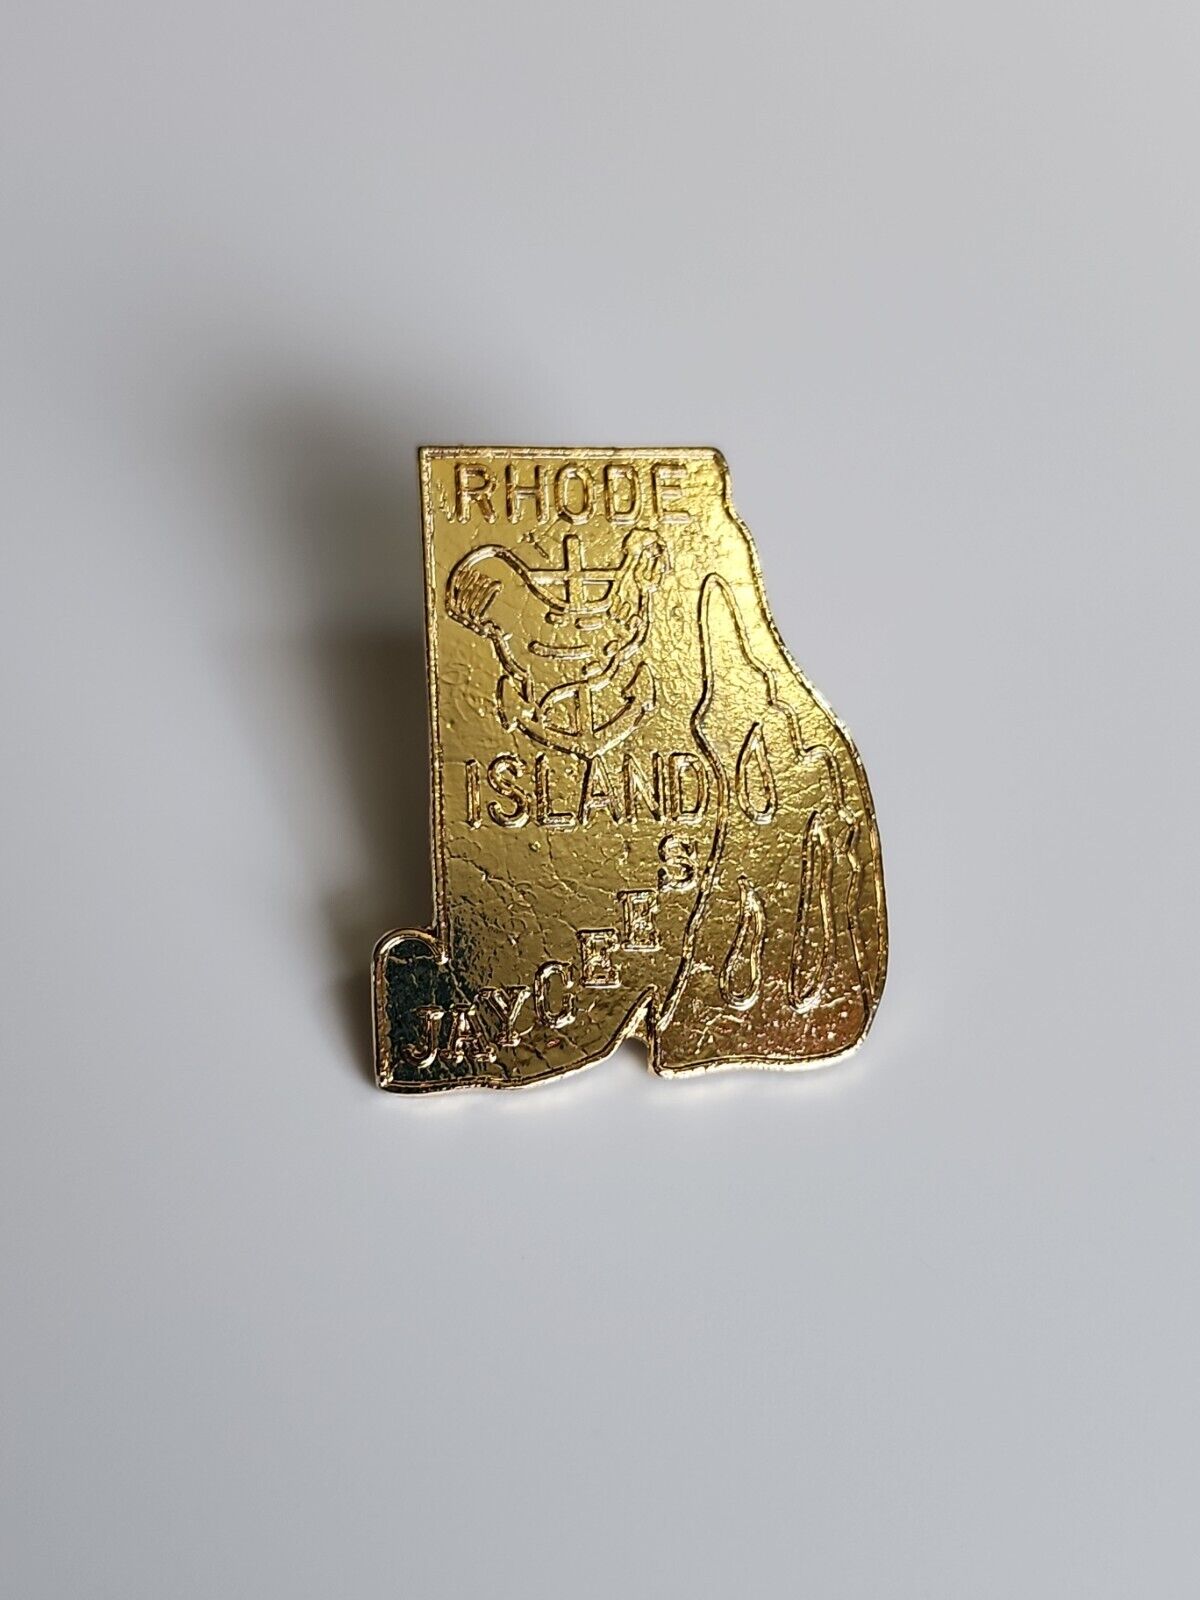 Rhode Island Jaycees Trading Pin Map Shaped Gold Colored Rooster